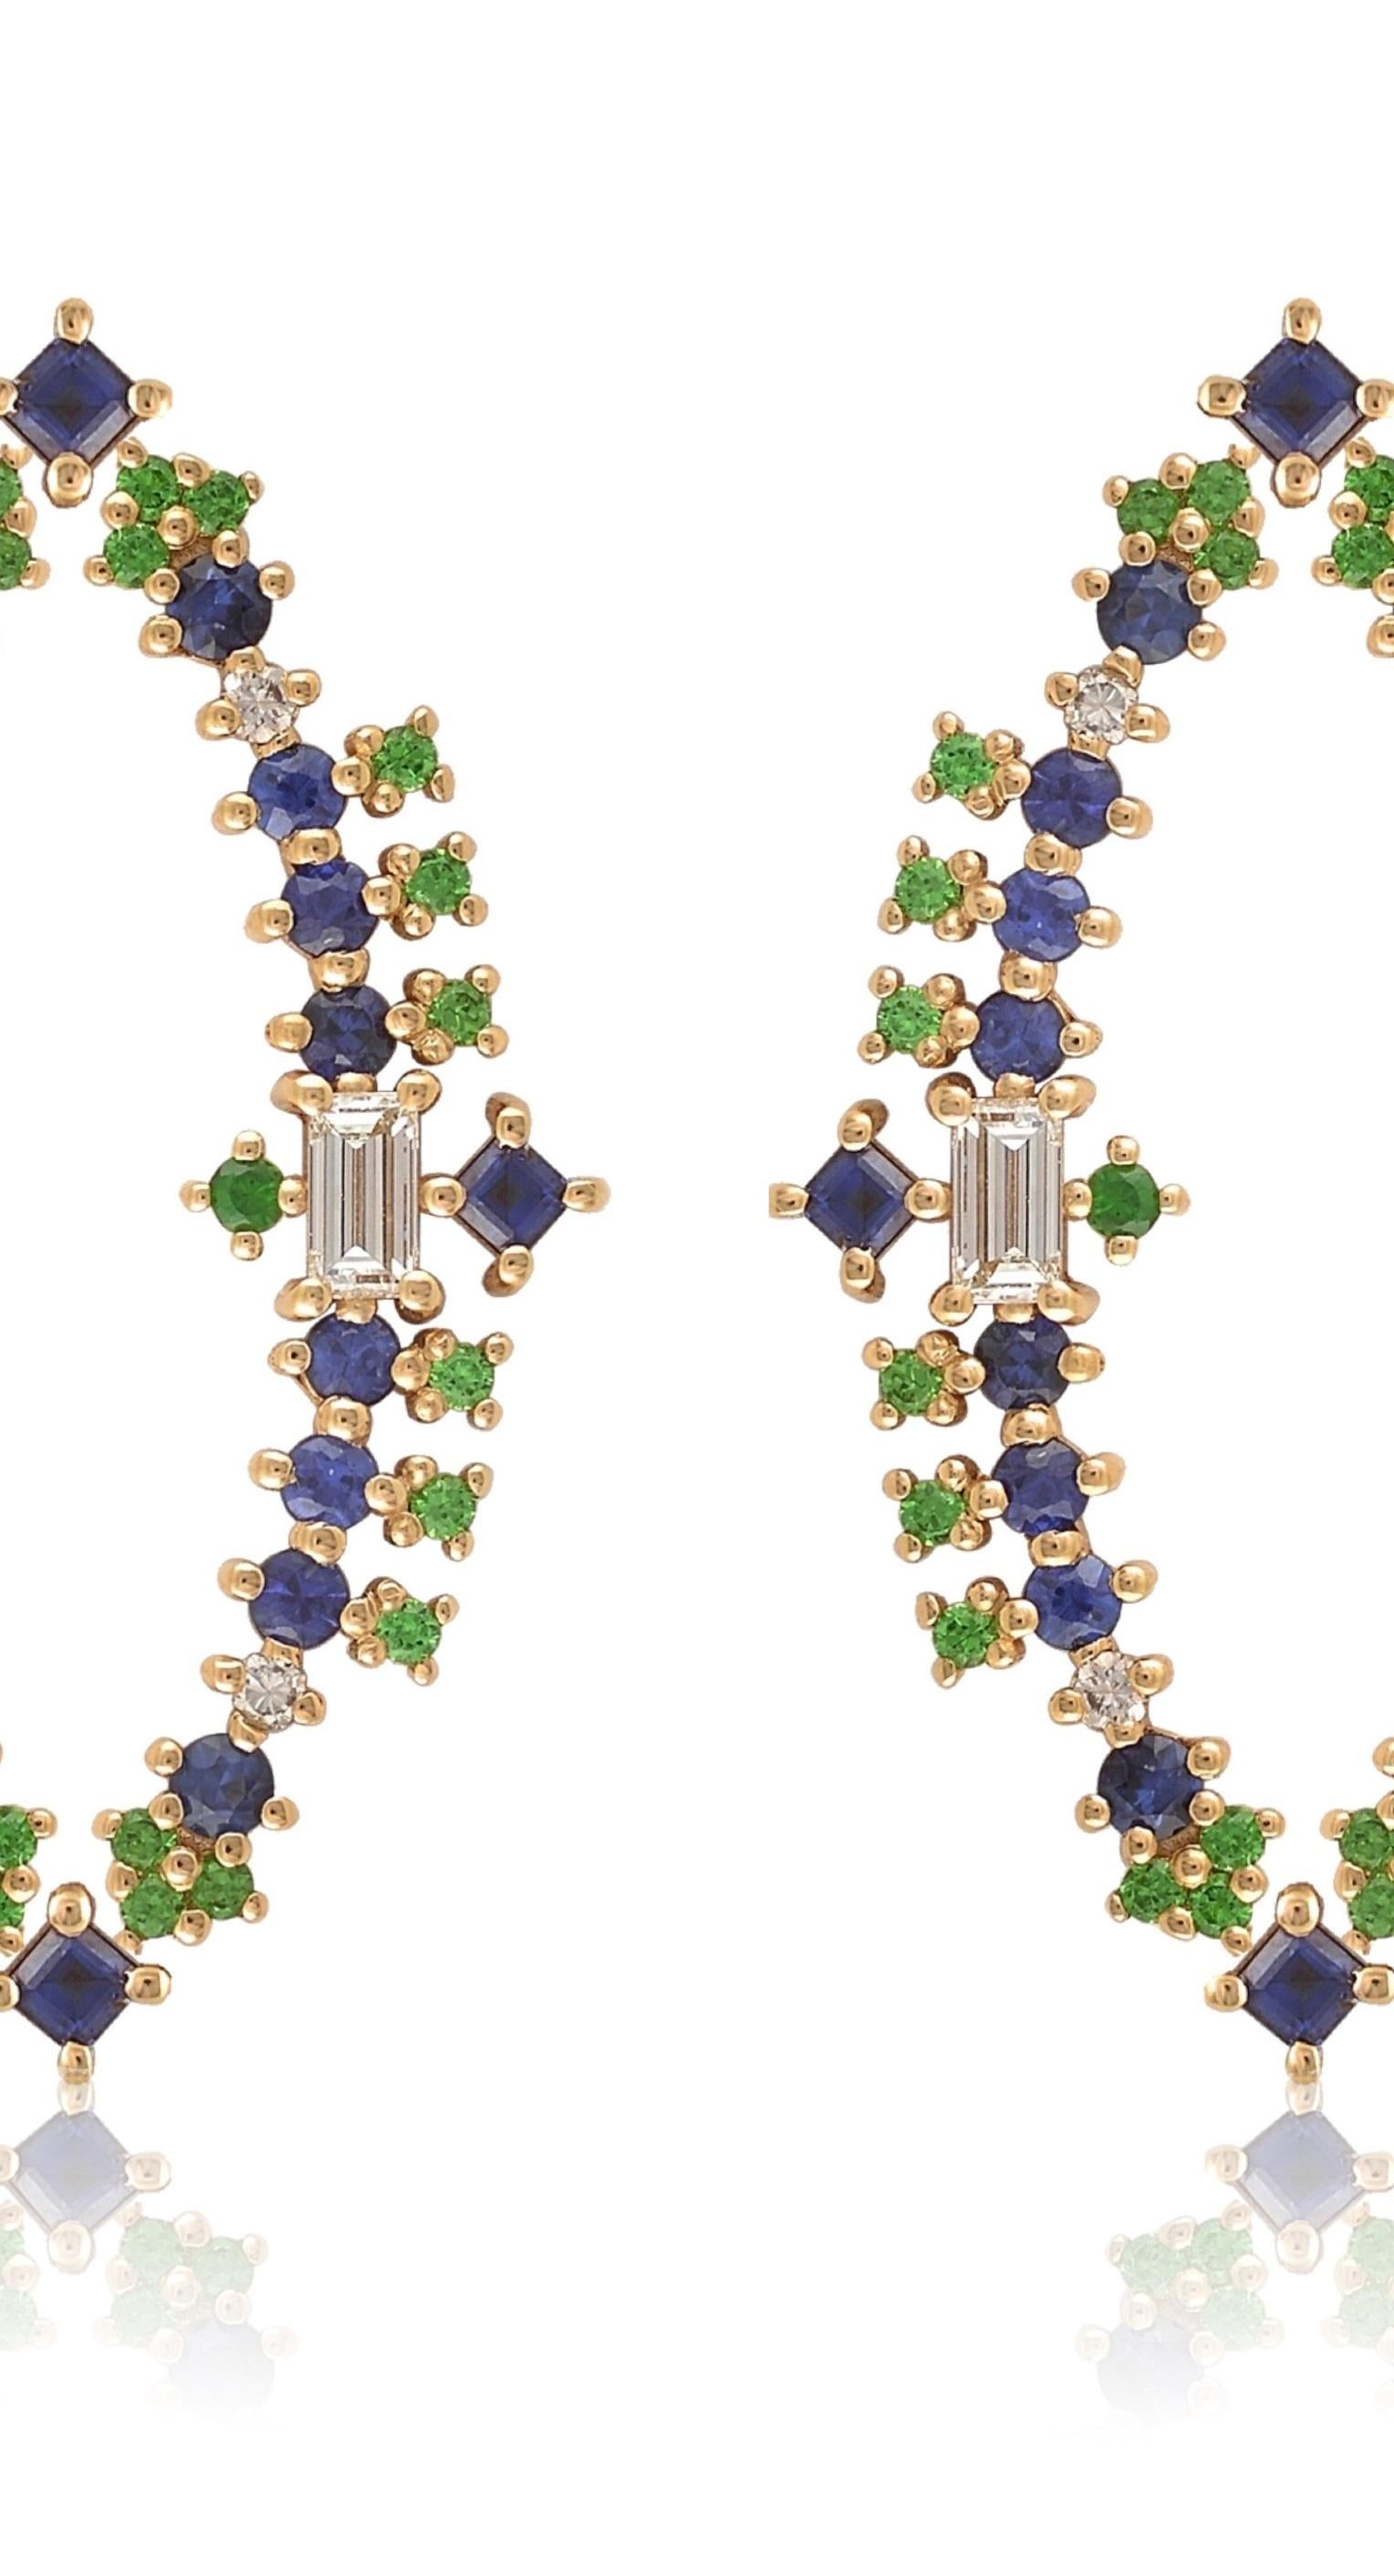 Designer: Alexia Gryllaki
Dimensions: L38x23mm
Weight: approximately 7.4g (pair)
Barcode: OFS055

Multi-stone earrings in 18 karat yellow gold with round faceted sapphires approx. 1.84cts, round faceted tsavorites approx. 0.52cts, round